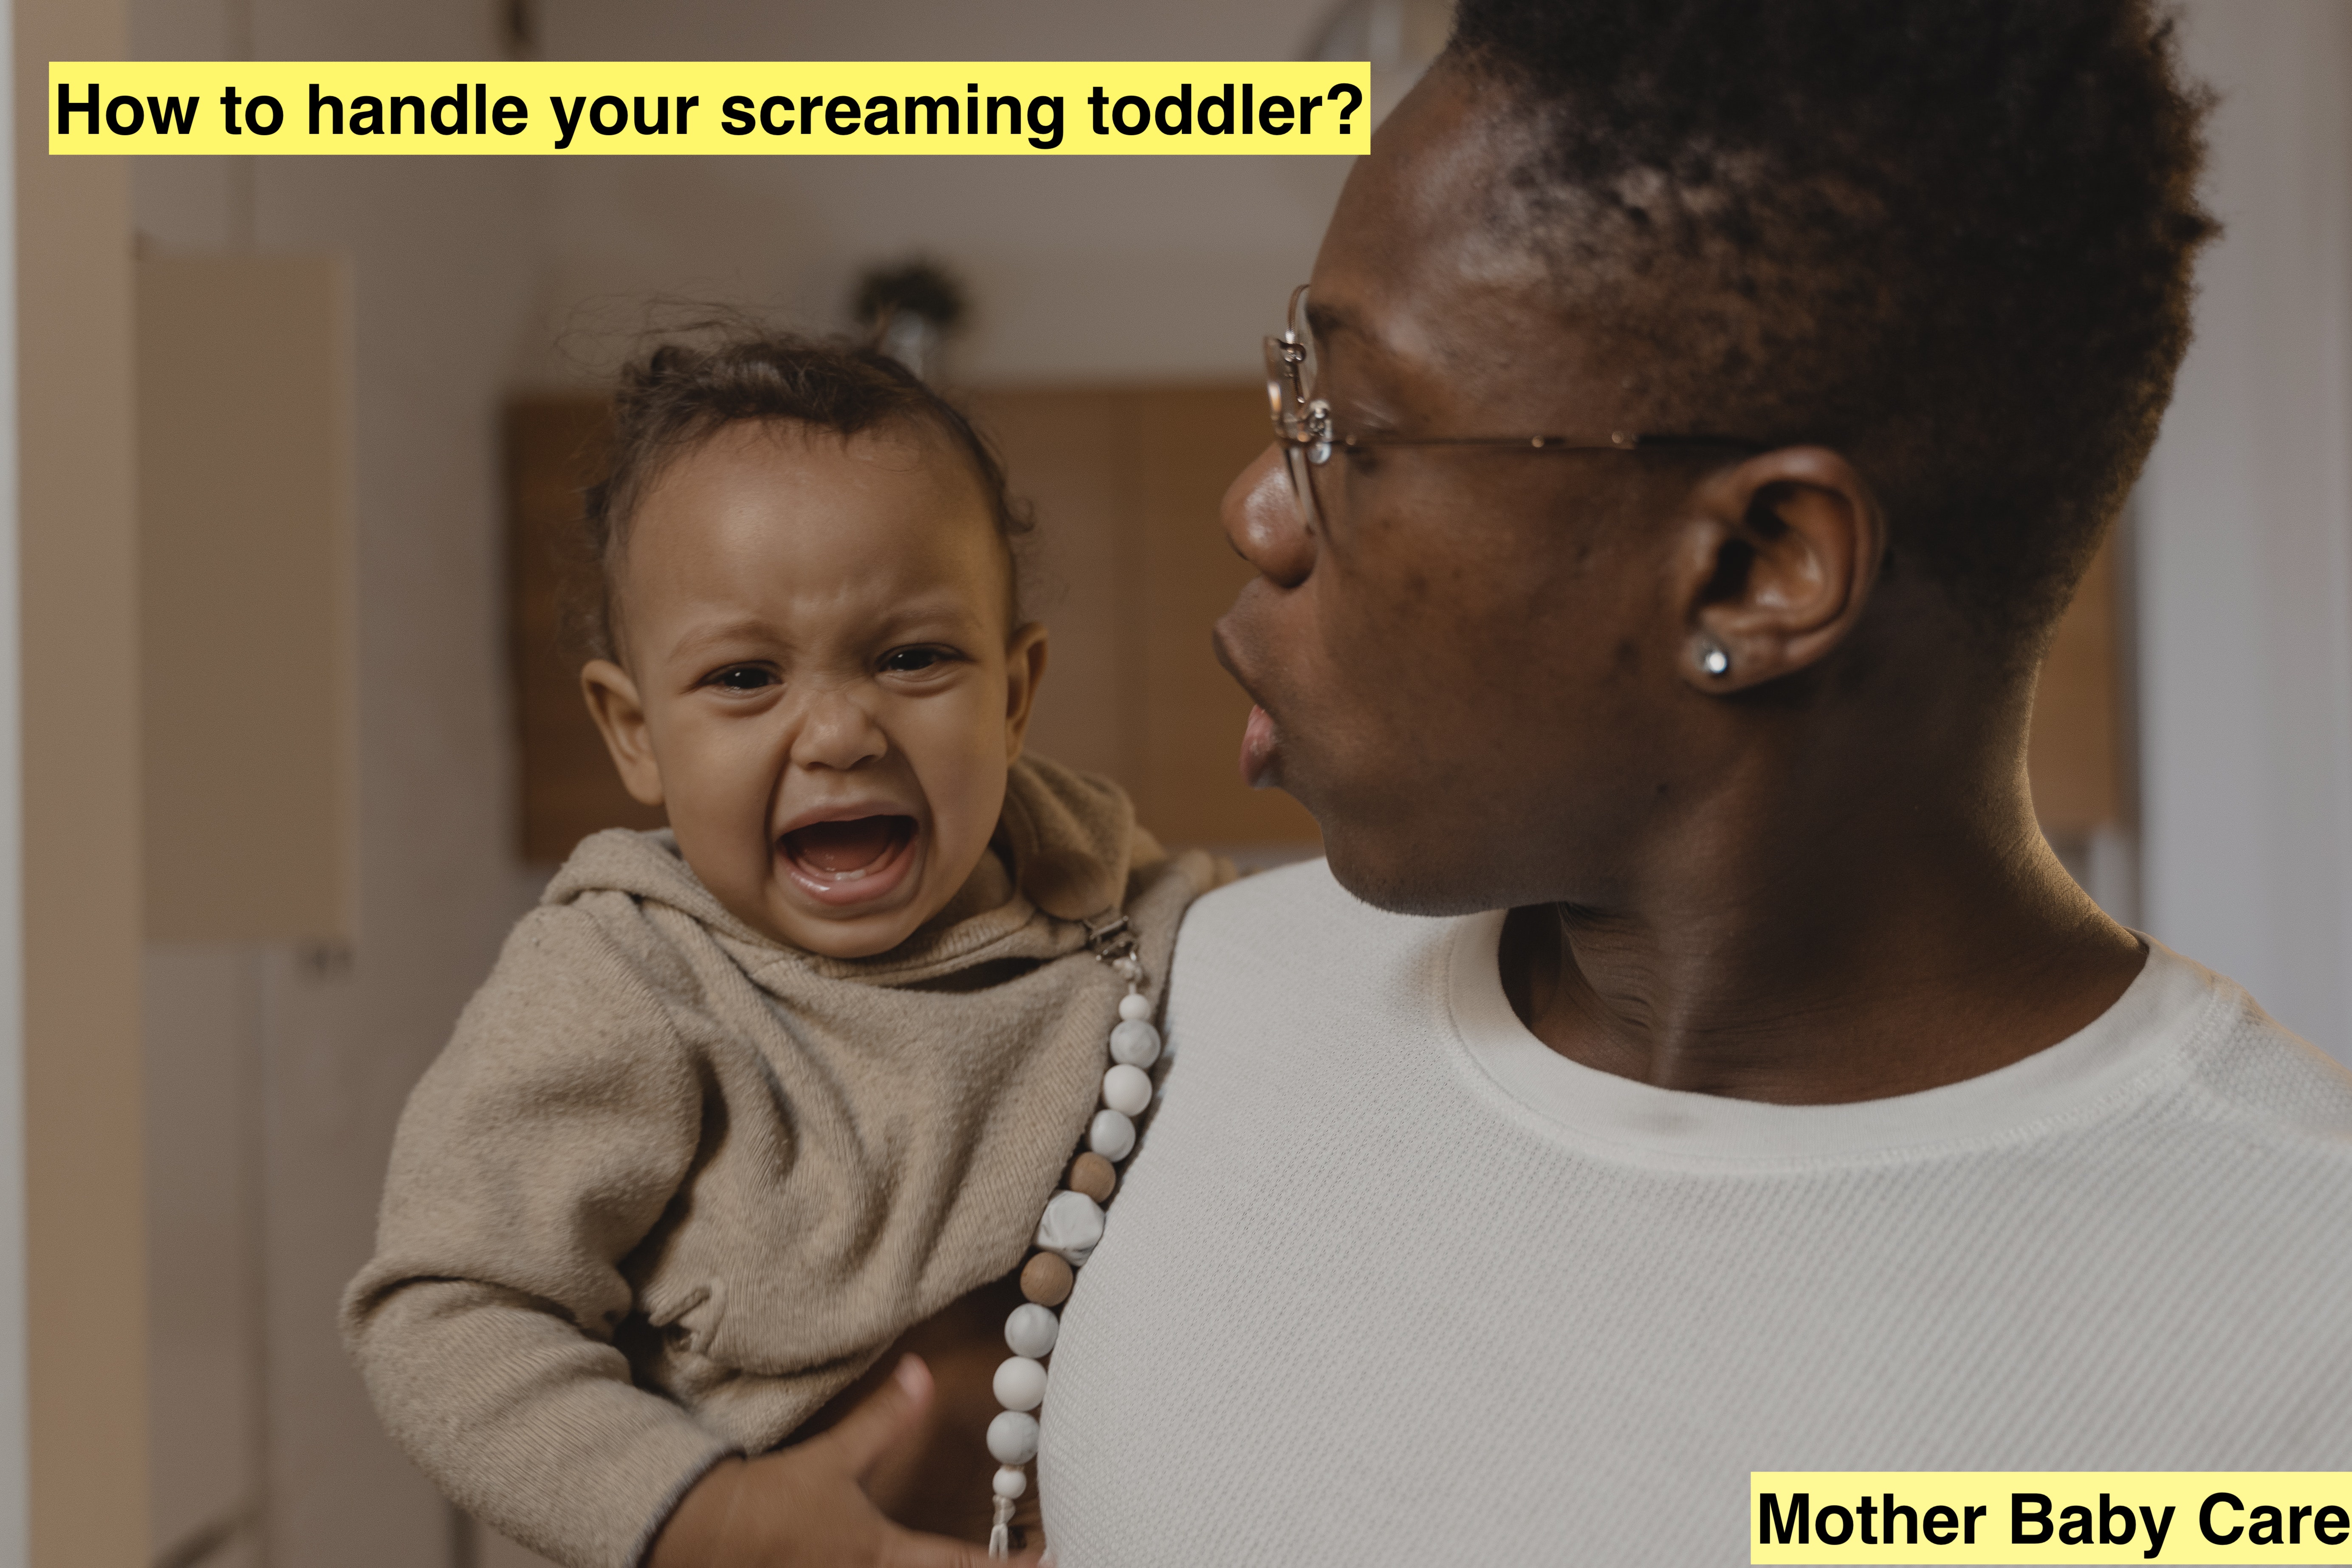 Ways to handle a screaming toddler